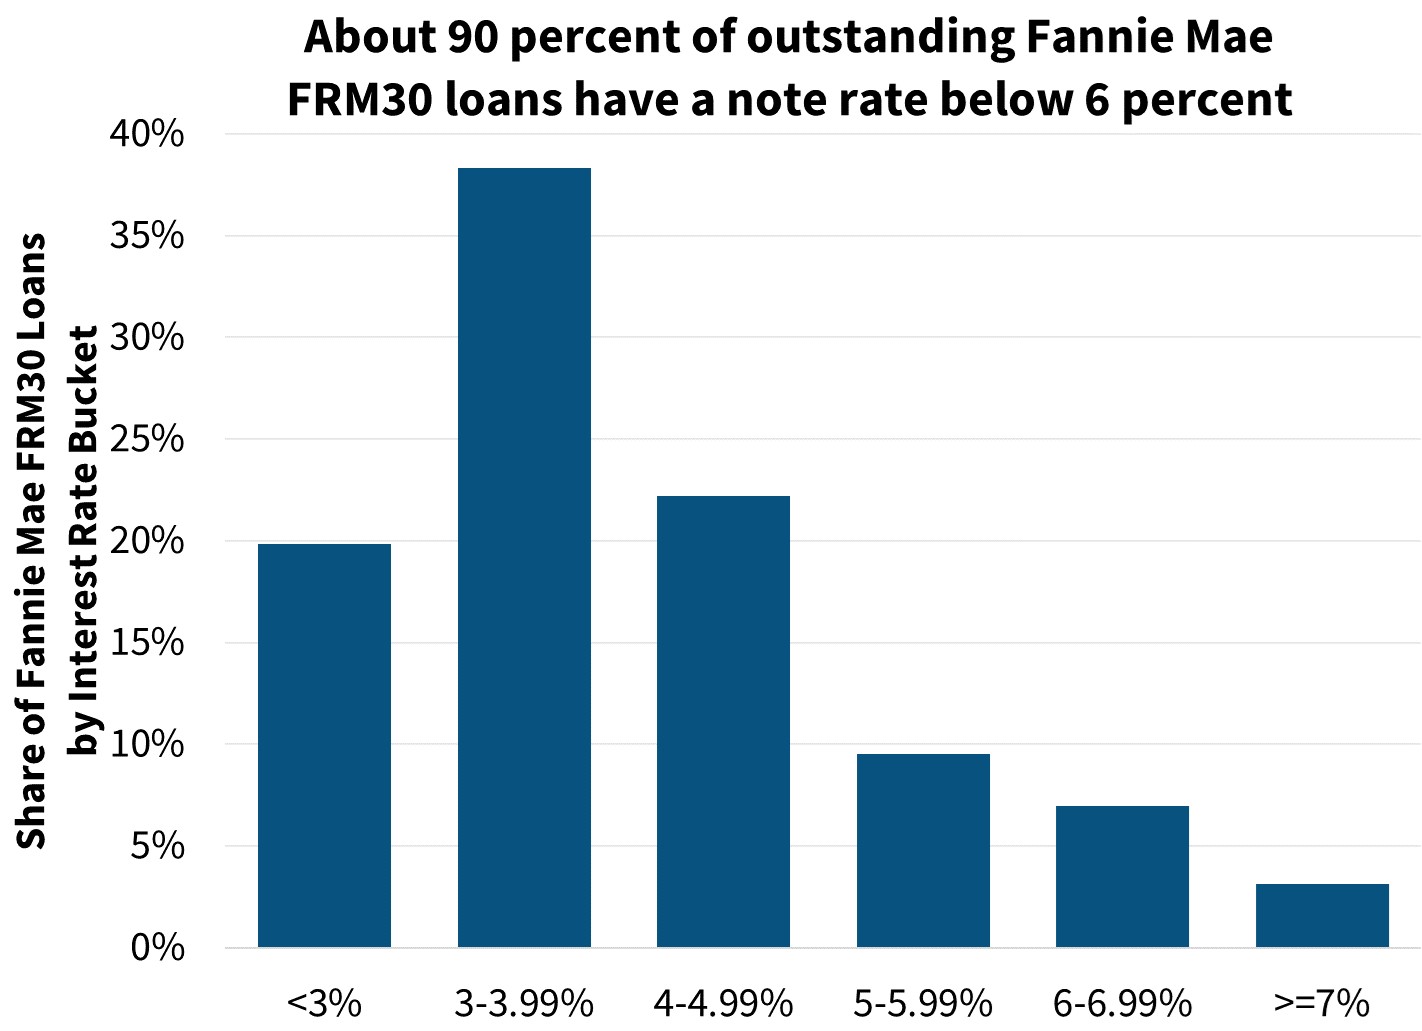 About 90 percent of outstanding Fannie Mae FRM30 loans have a note rate below 6 percent